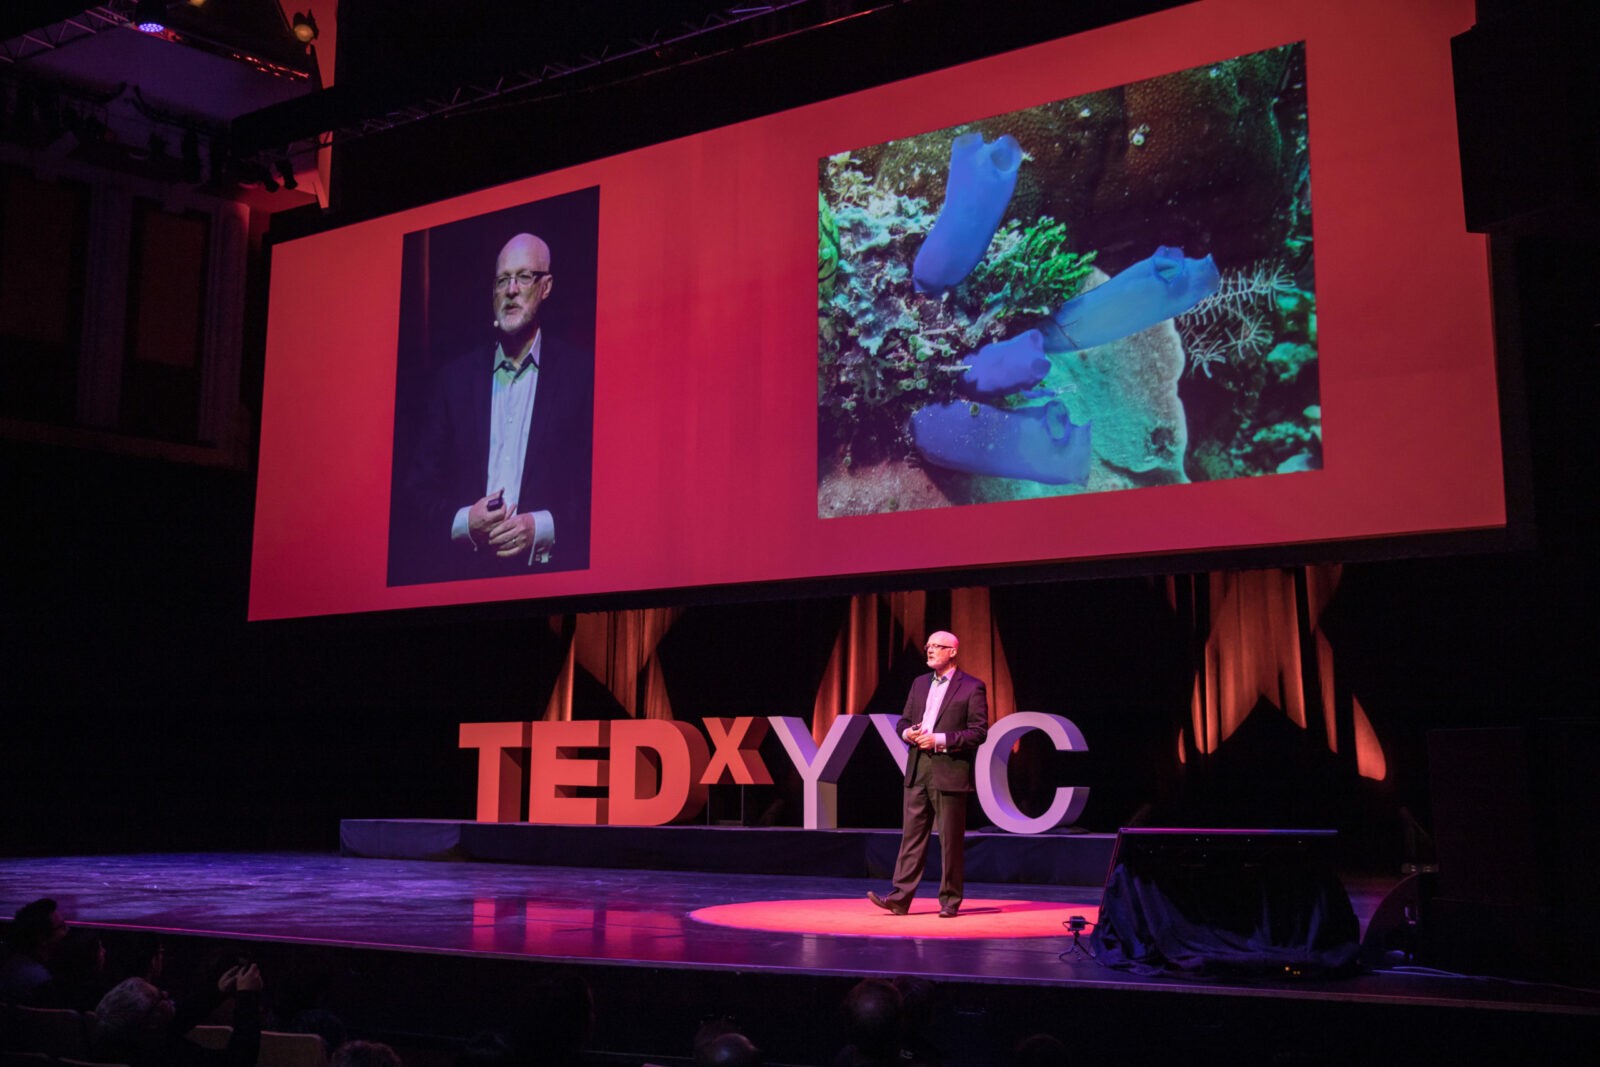 Over a million people have watched these 3 TEDxYYC talks – have you?